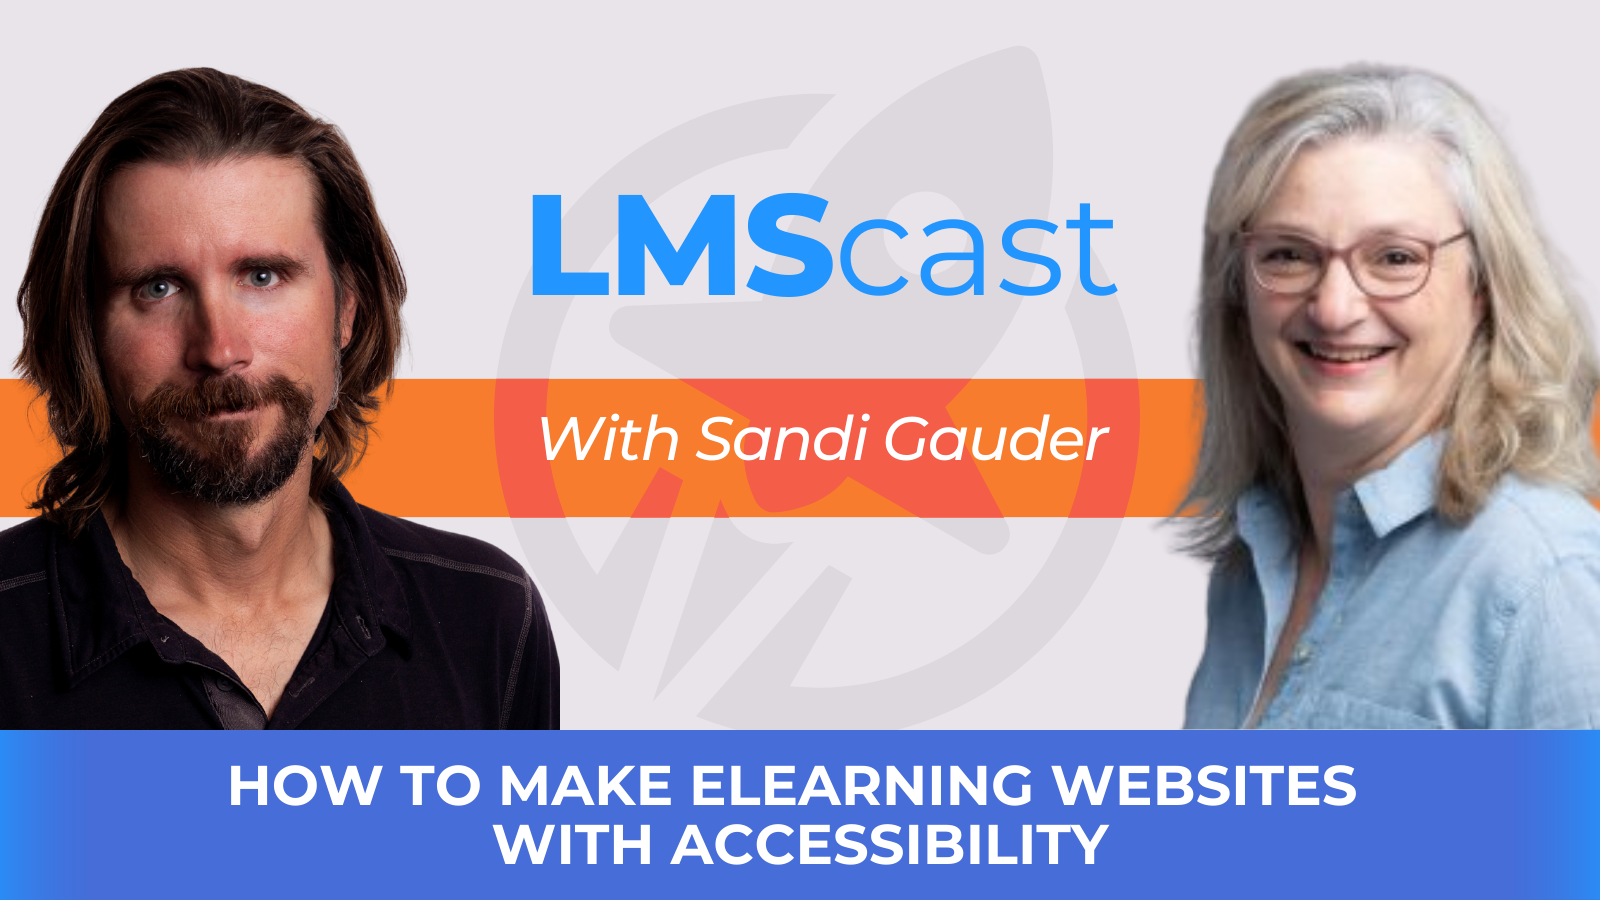 How to Make eLearning Websites with Accessibility with Sandi Gauder